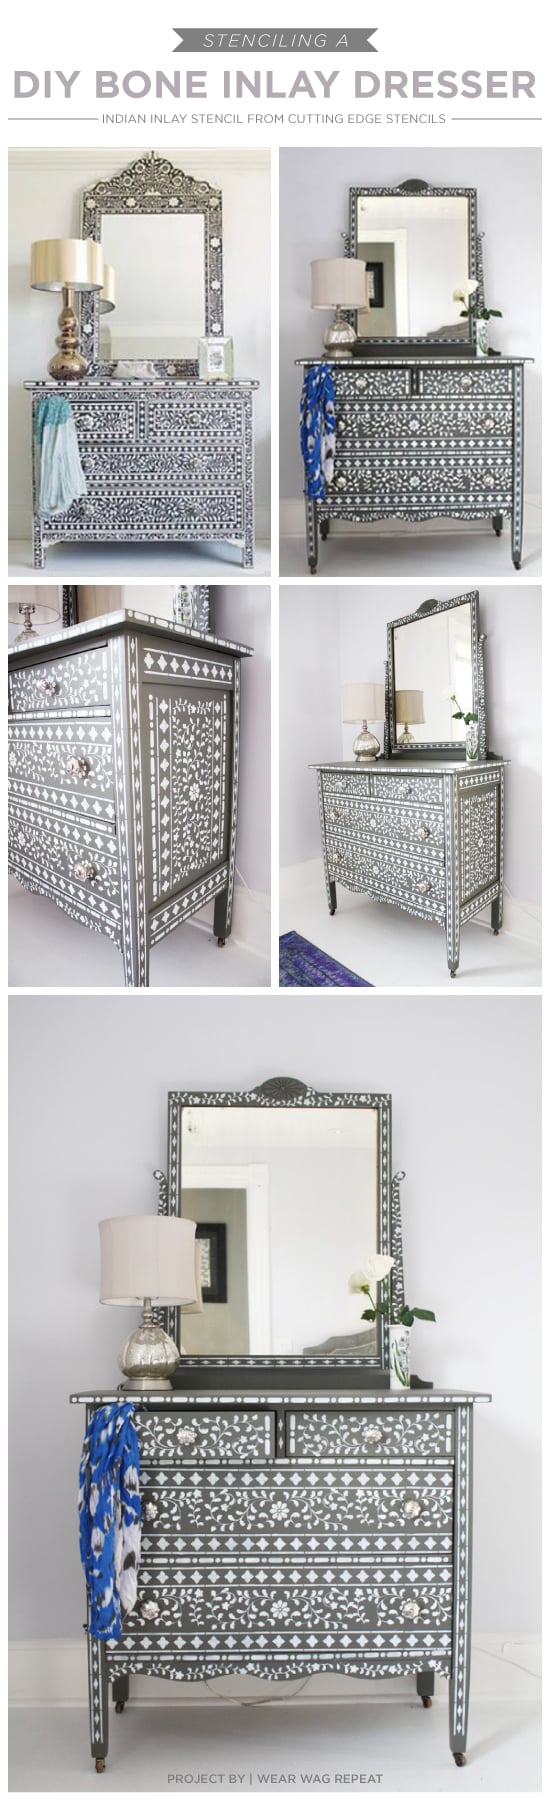 Cutting Edge Stencils shares aDIY stenciled dresser using the Indian Inlay Stencil kit. http://www.cuttingedgestencils.com/indian-inlay-stencil-furniture.html